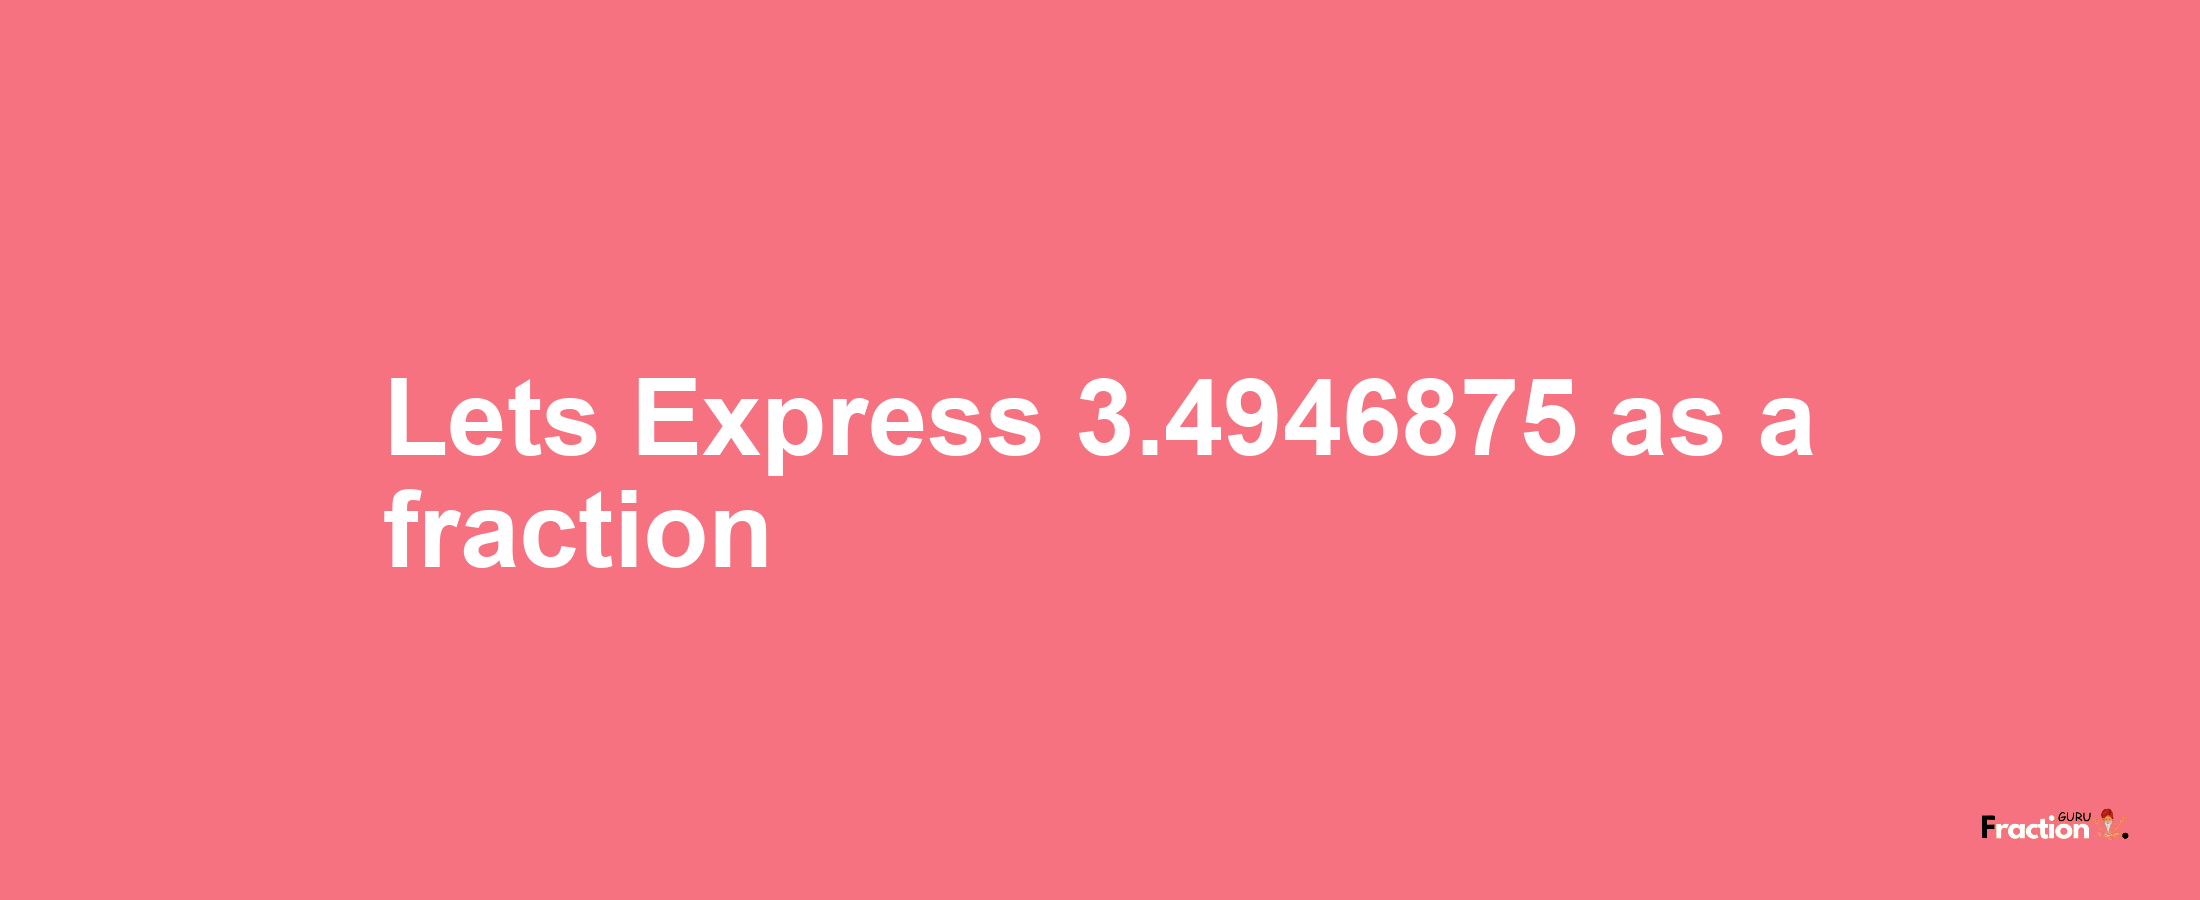 Lets Express 3.4946875 as afraction